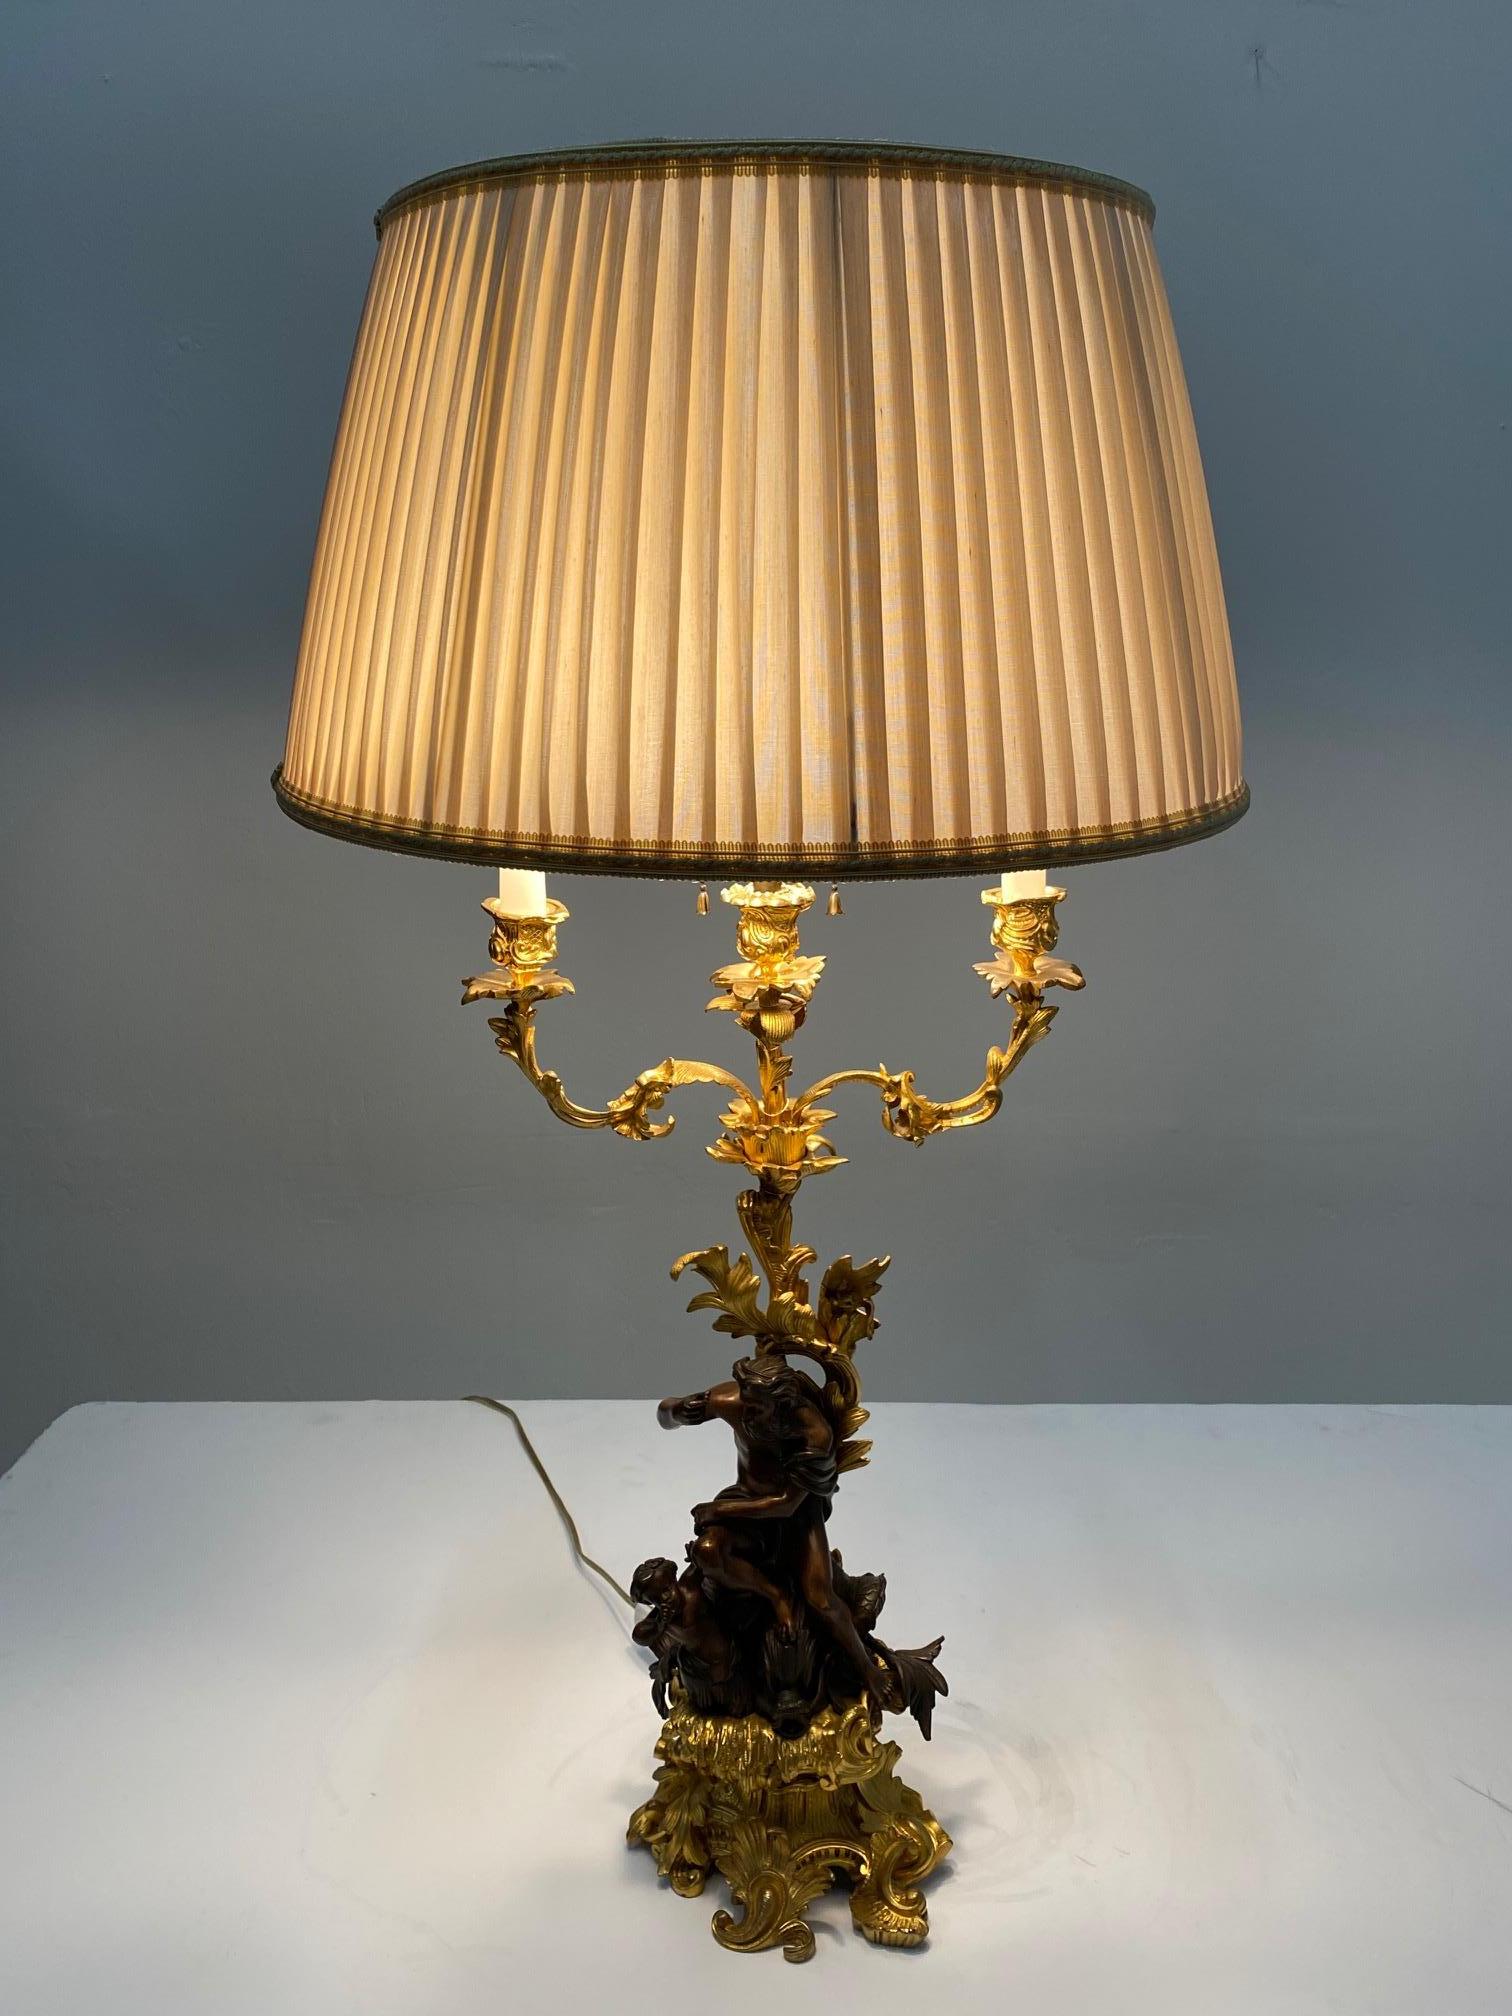 A true work of art in a very ornate French 19th century gilt & patinated bronze candlestick turned into a table lamp, depicting a sculpture of Neptune riding a dolphin with a putti companion by his side.
Note: Shade not included.